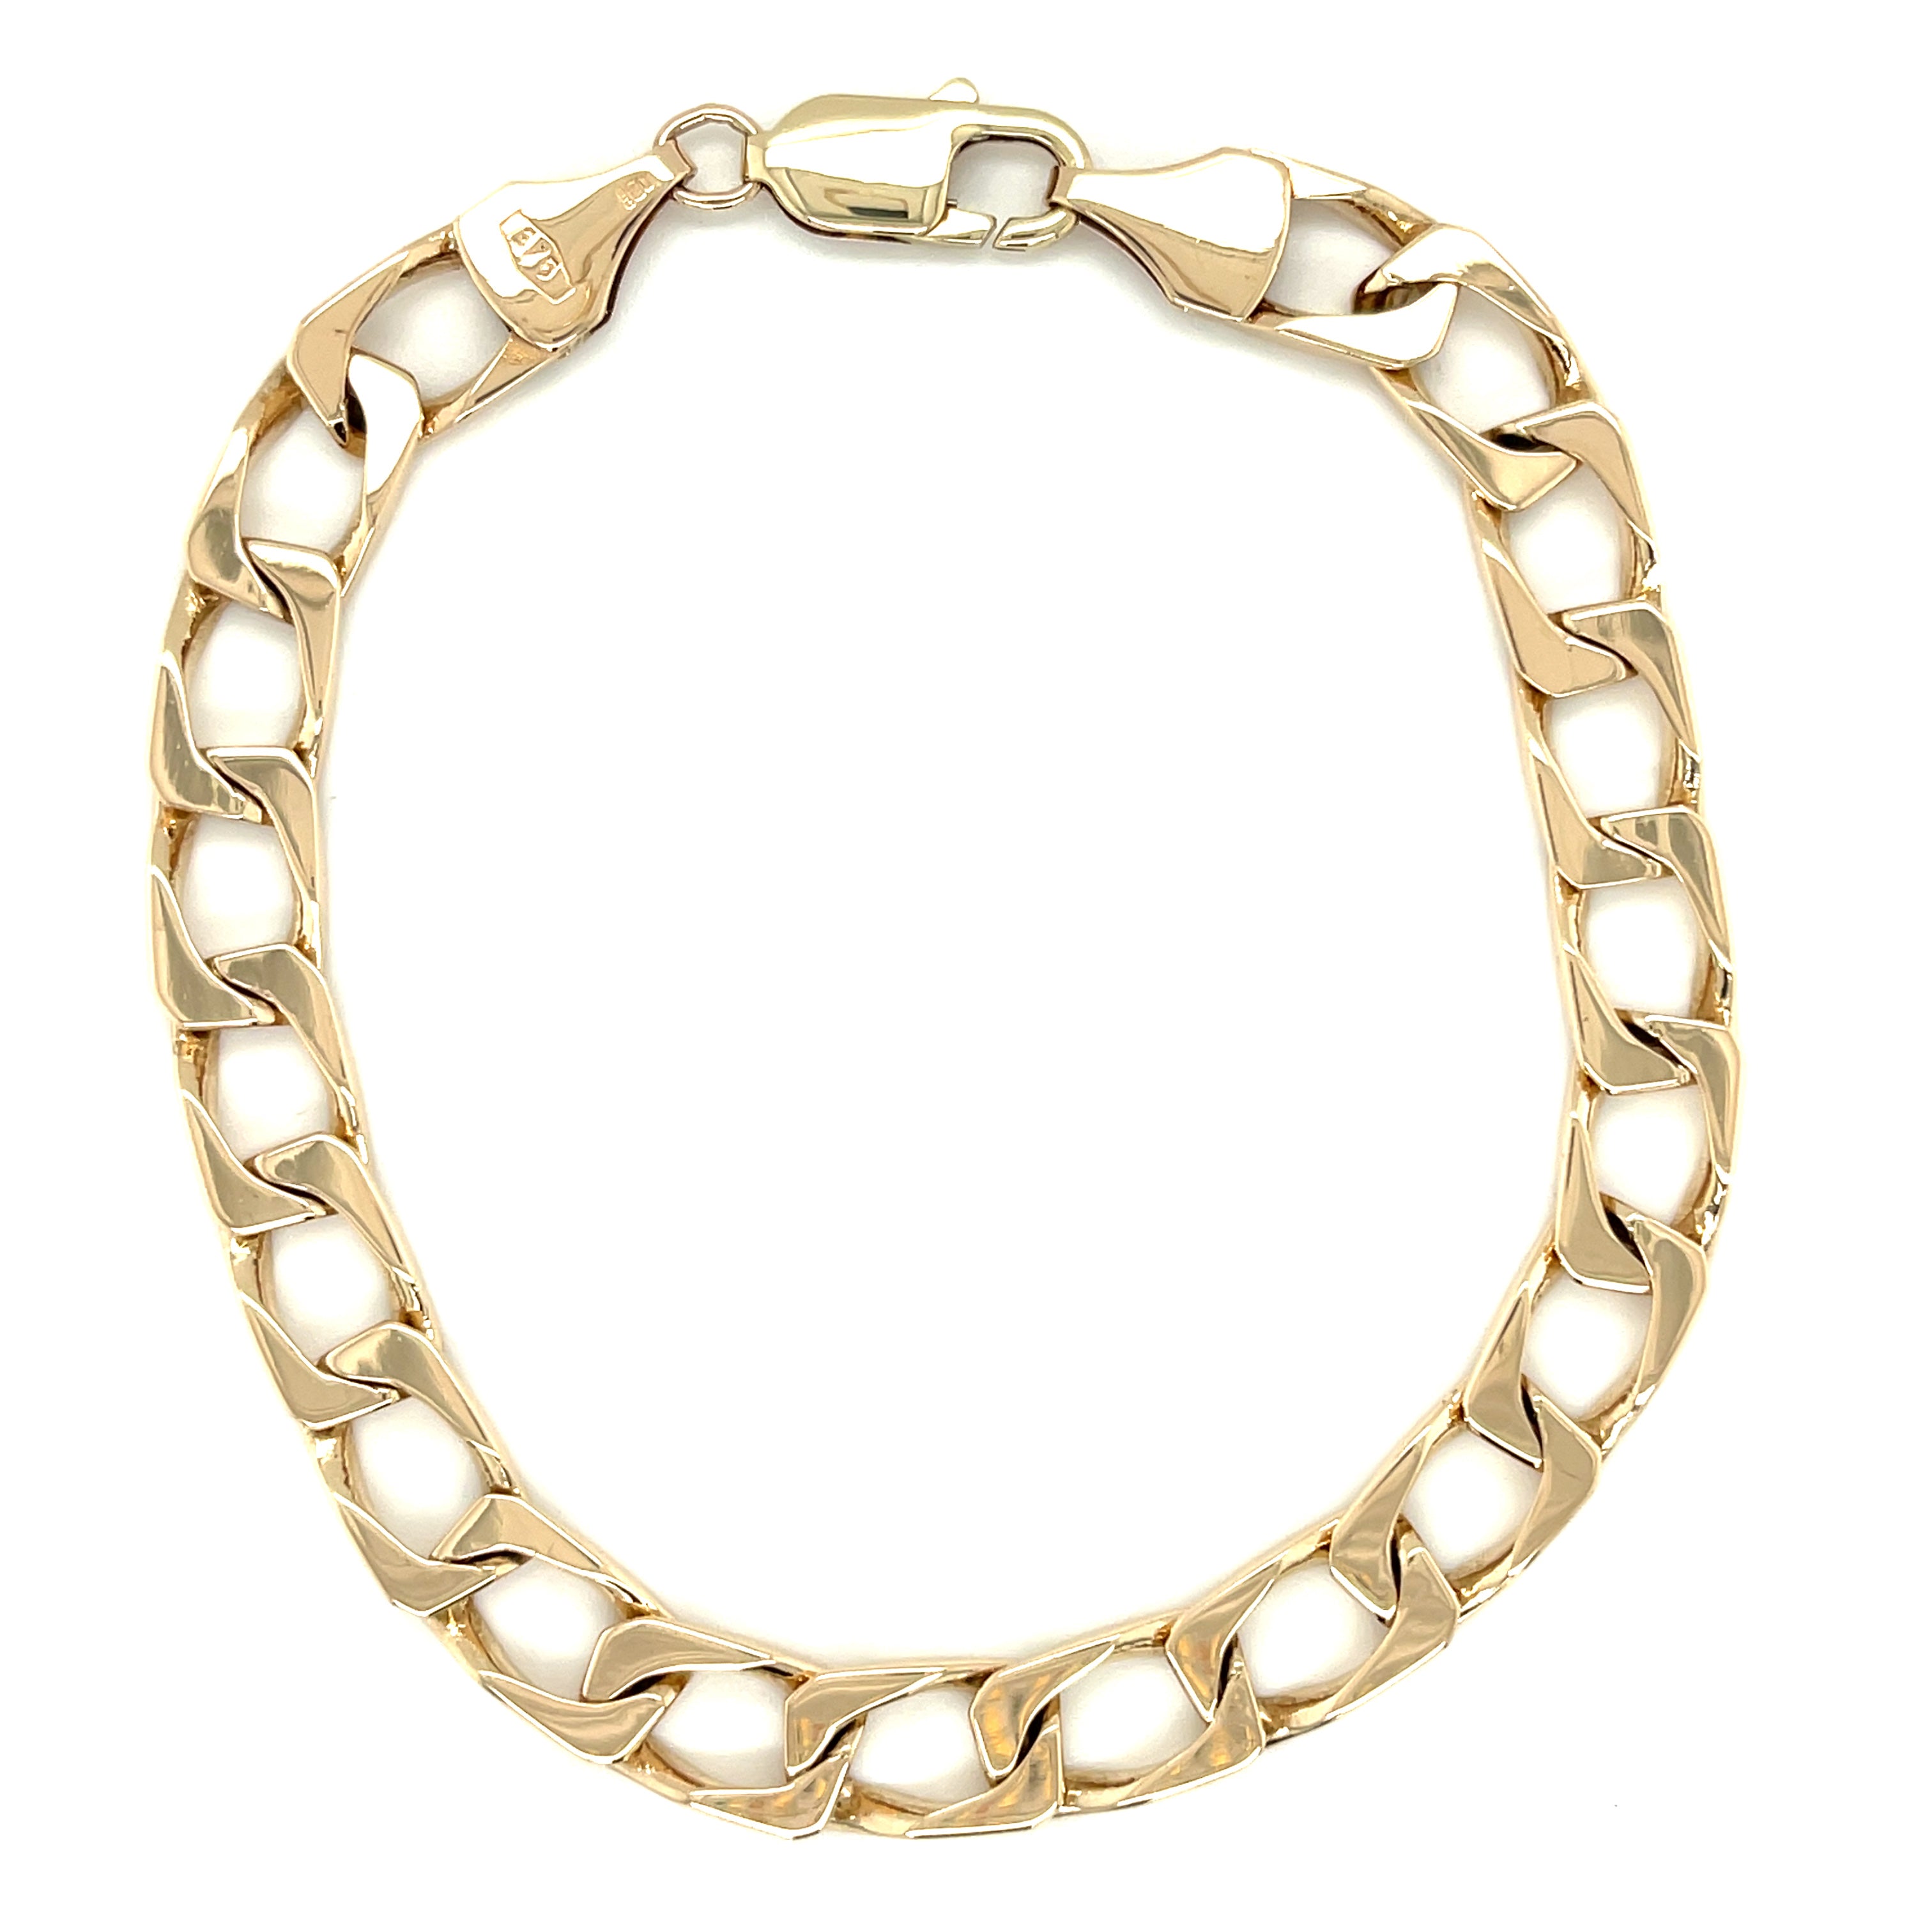 9ct Yellow Gold 8.5 Inch Square Curb Link Bracelet - 20.01g